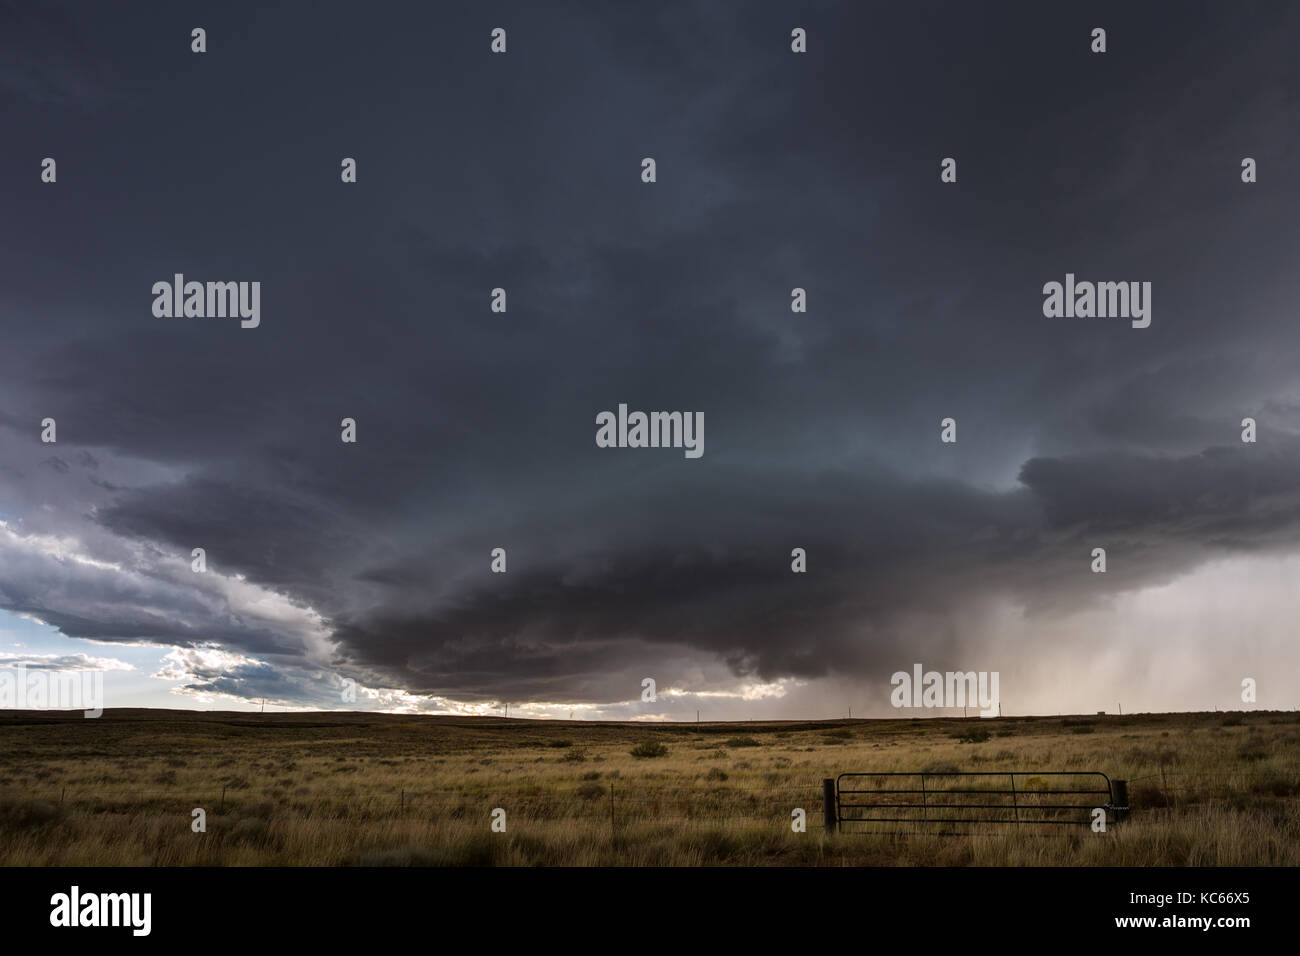 Supercell thunderstorm with tornado and dark storm clouds over a field near Belen, New Mexico Stock Photo